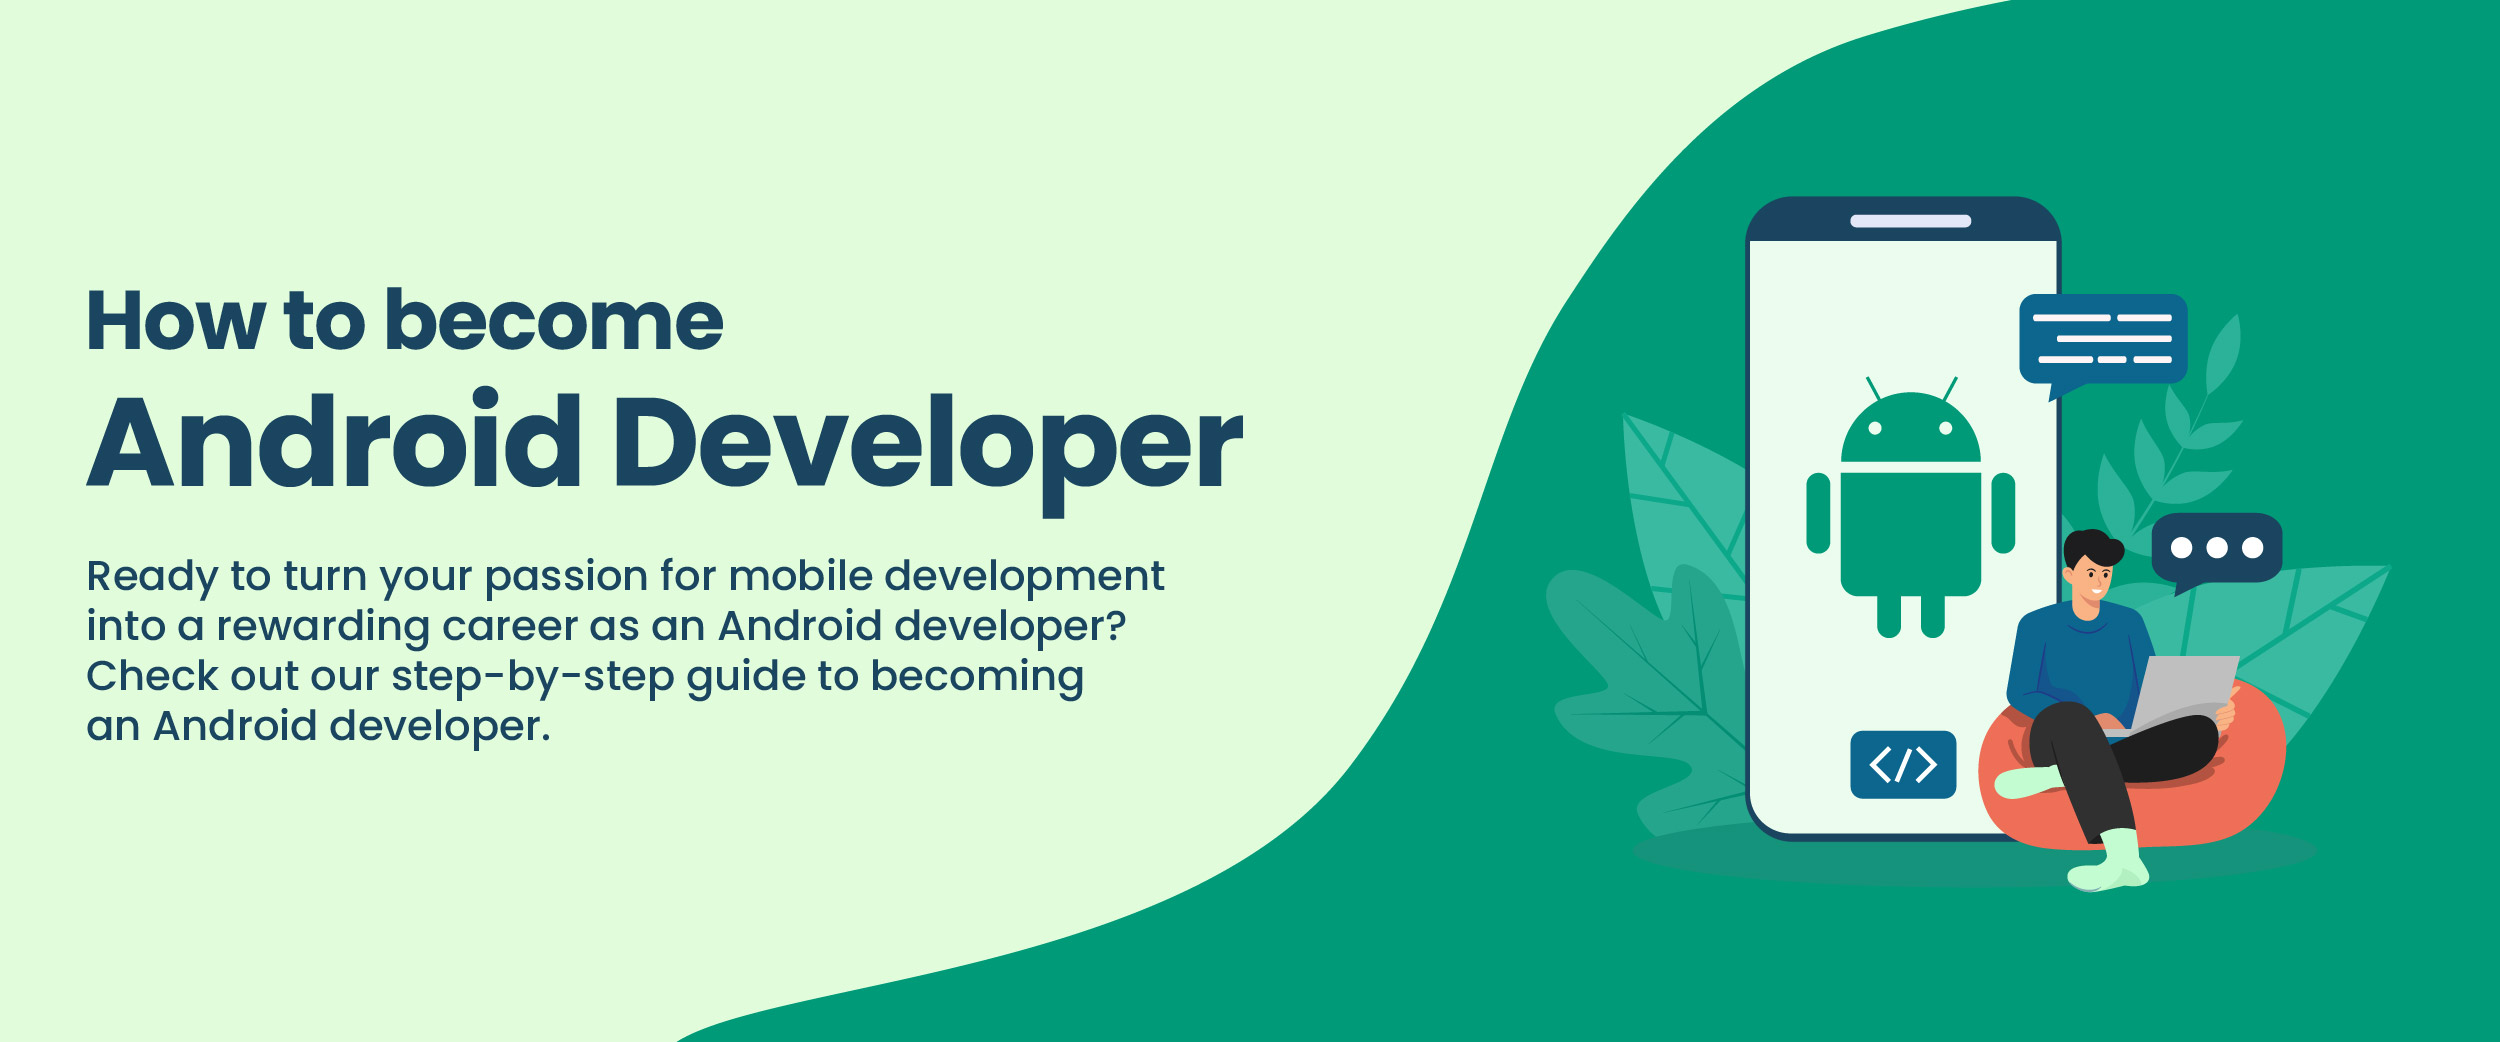 how to become an android developer